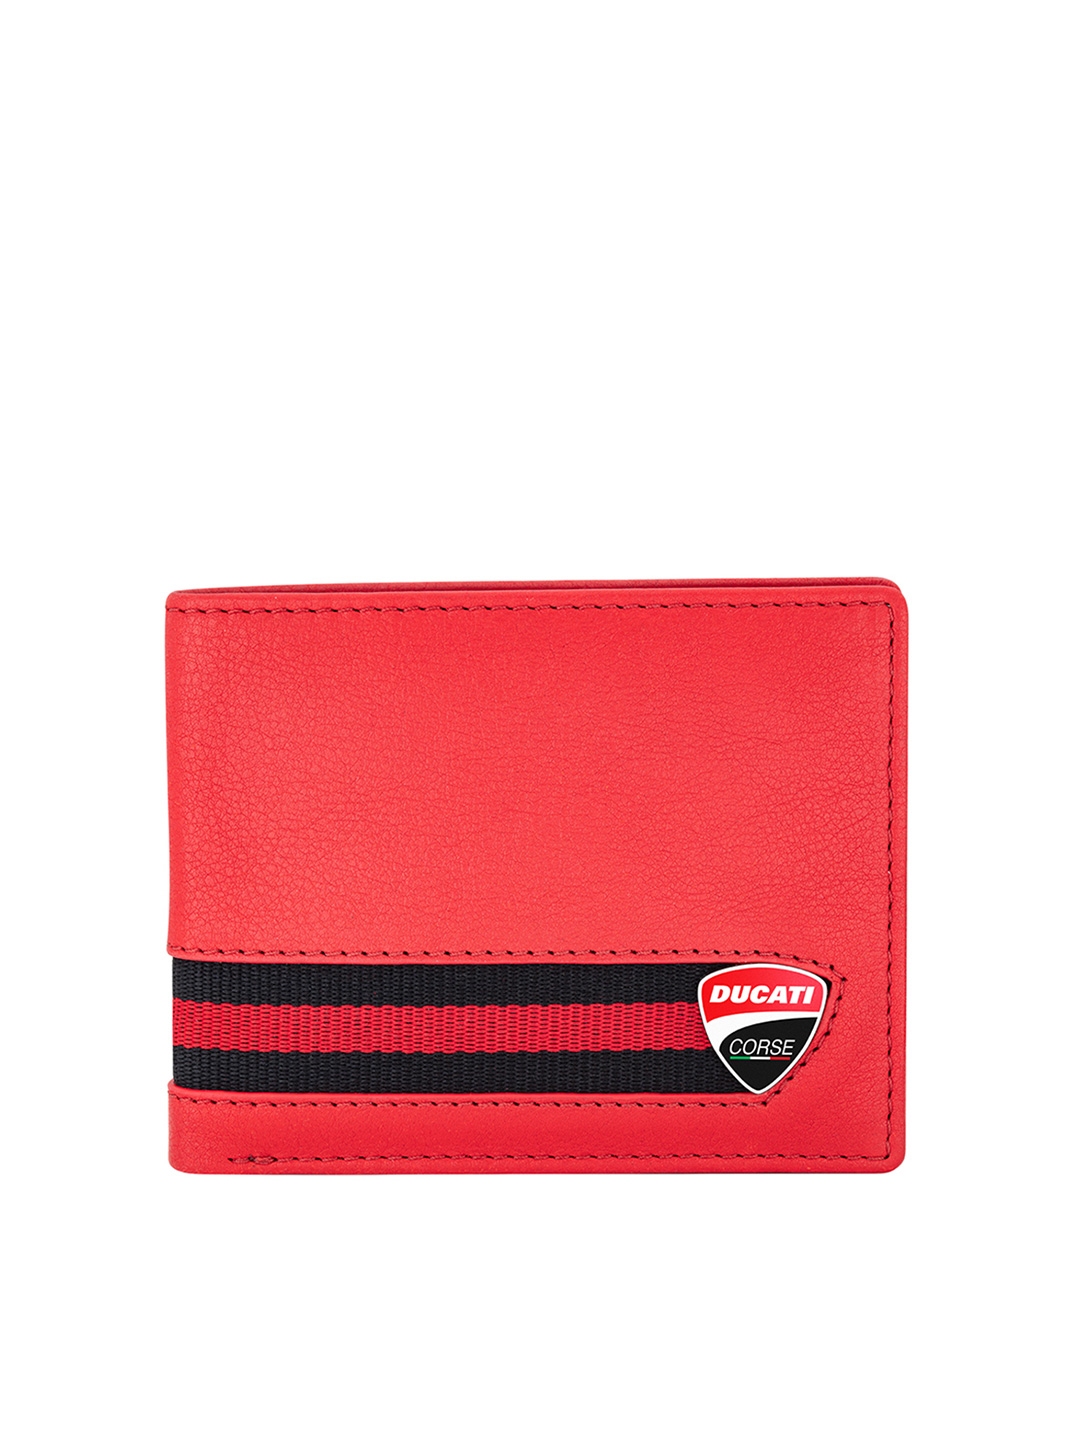 Buy DUCATI CORSE Men Red & Black Leather Two Fold Wallet - Wallets for ...